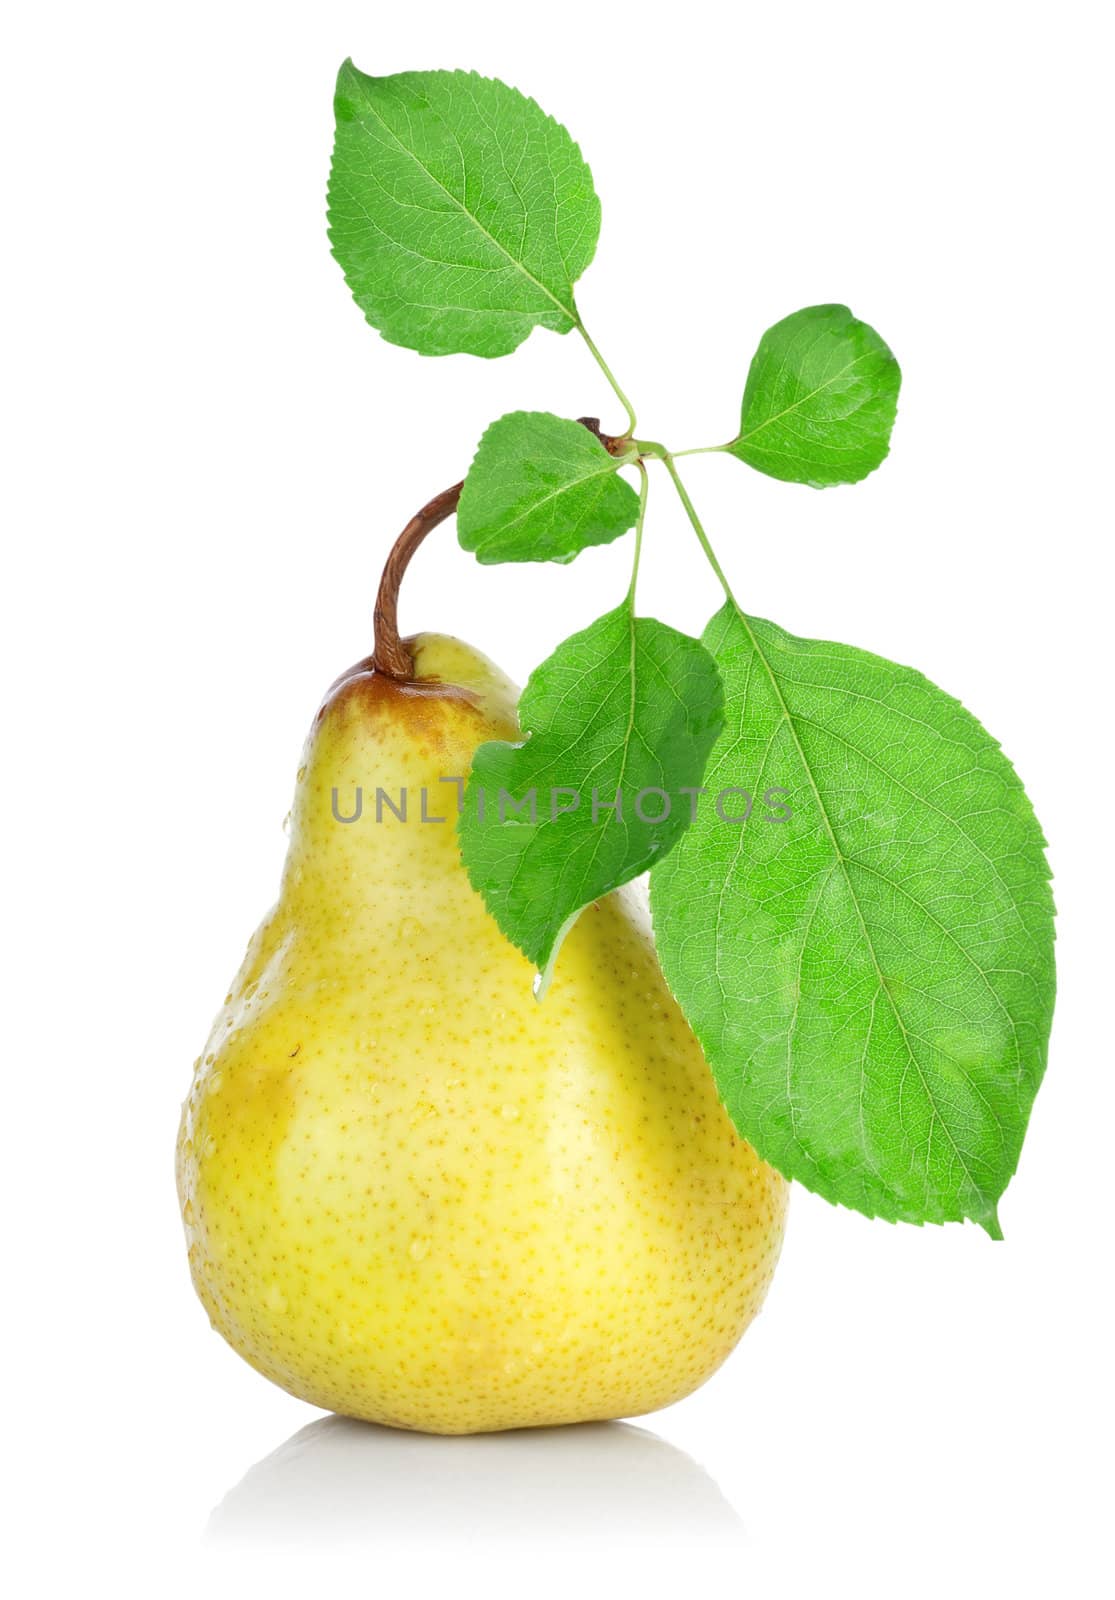 Yellow pear with green leafs isolated on white background